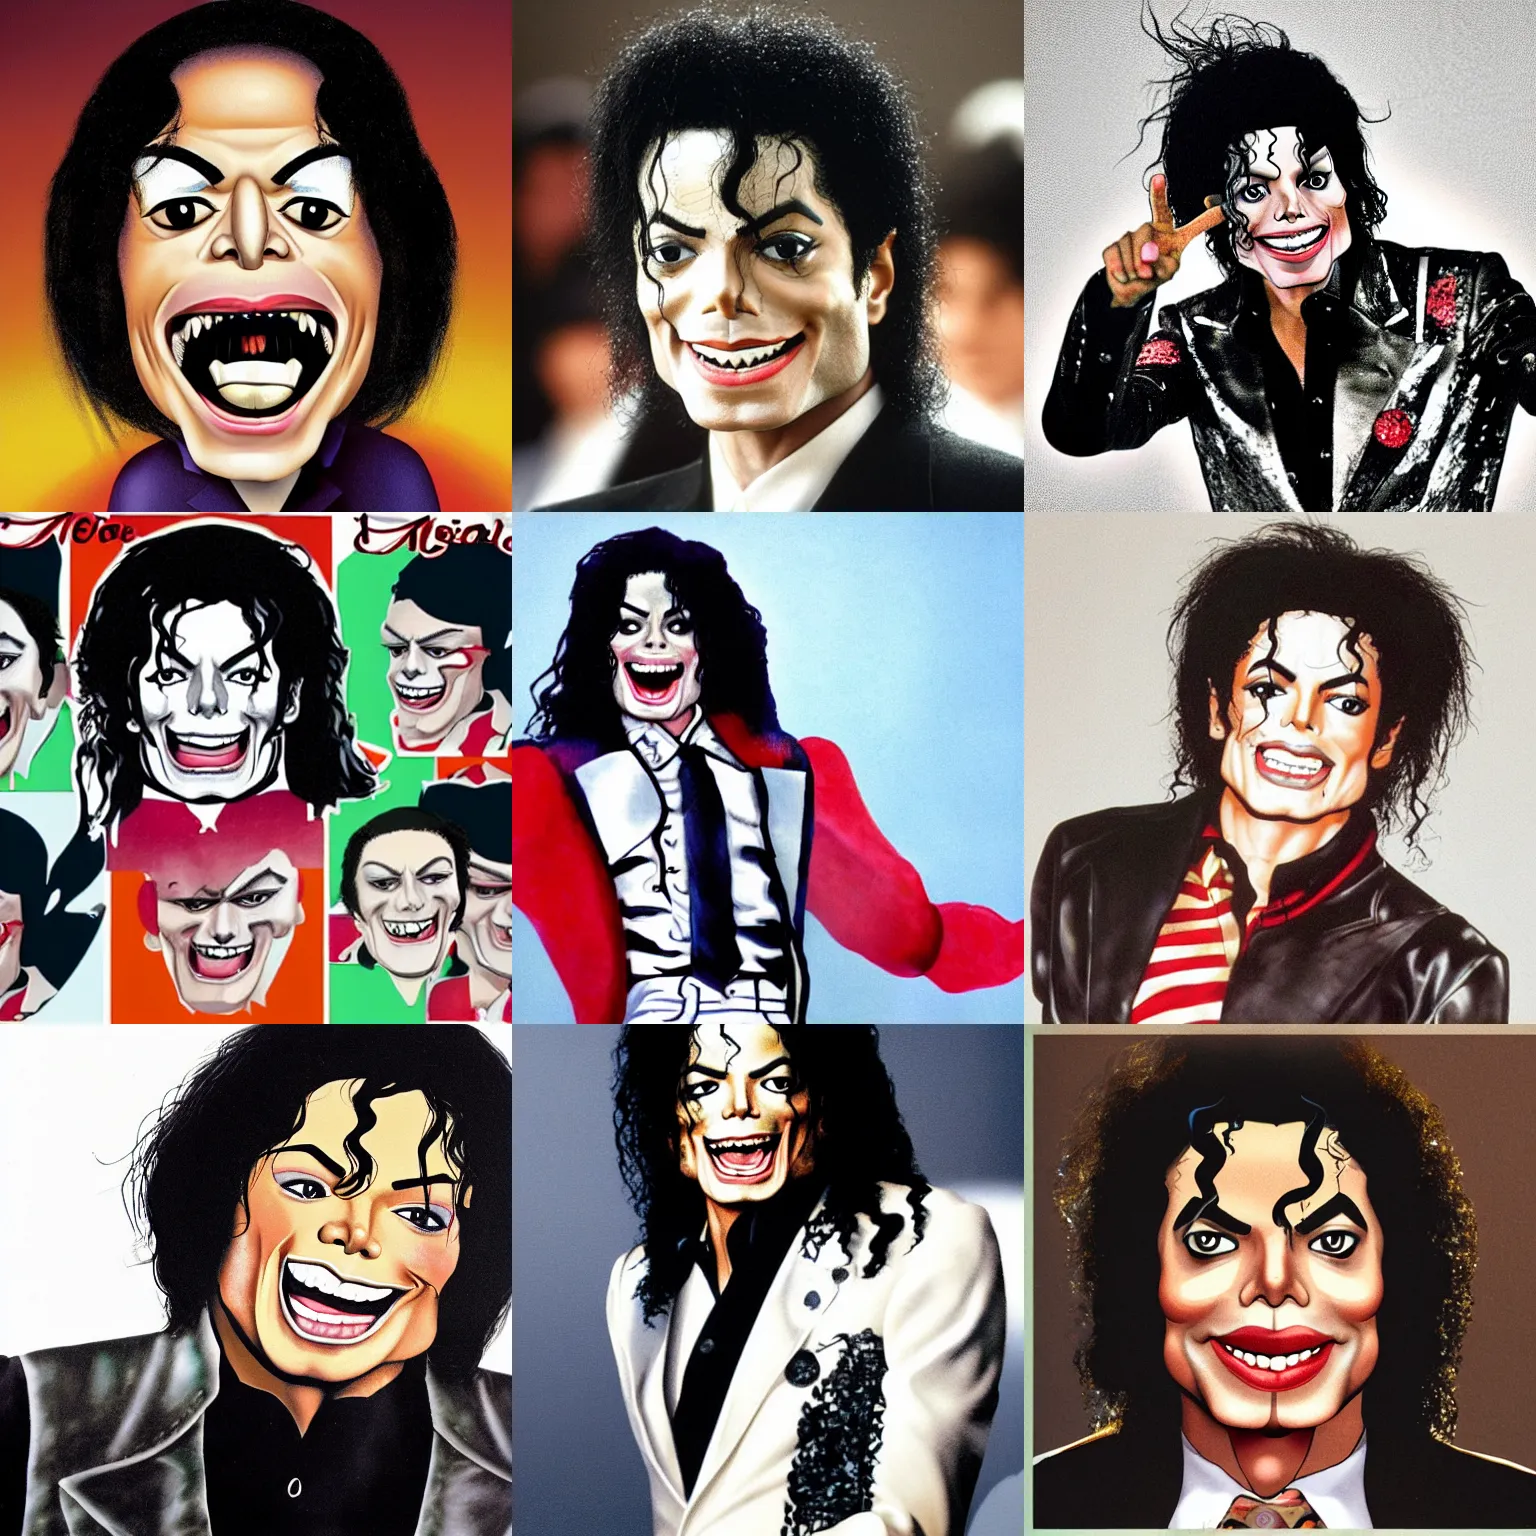 Prompt: an exaggerated caricature of Michael Jackson smiling evil